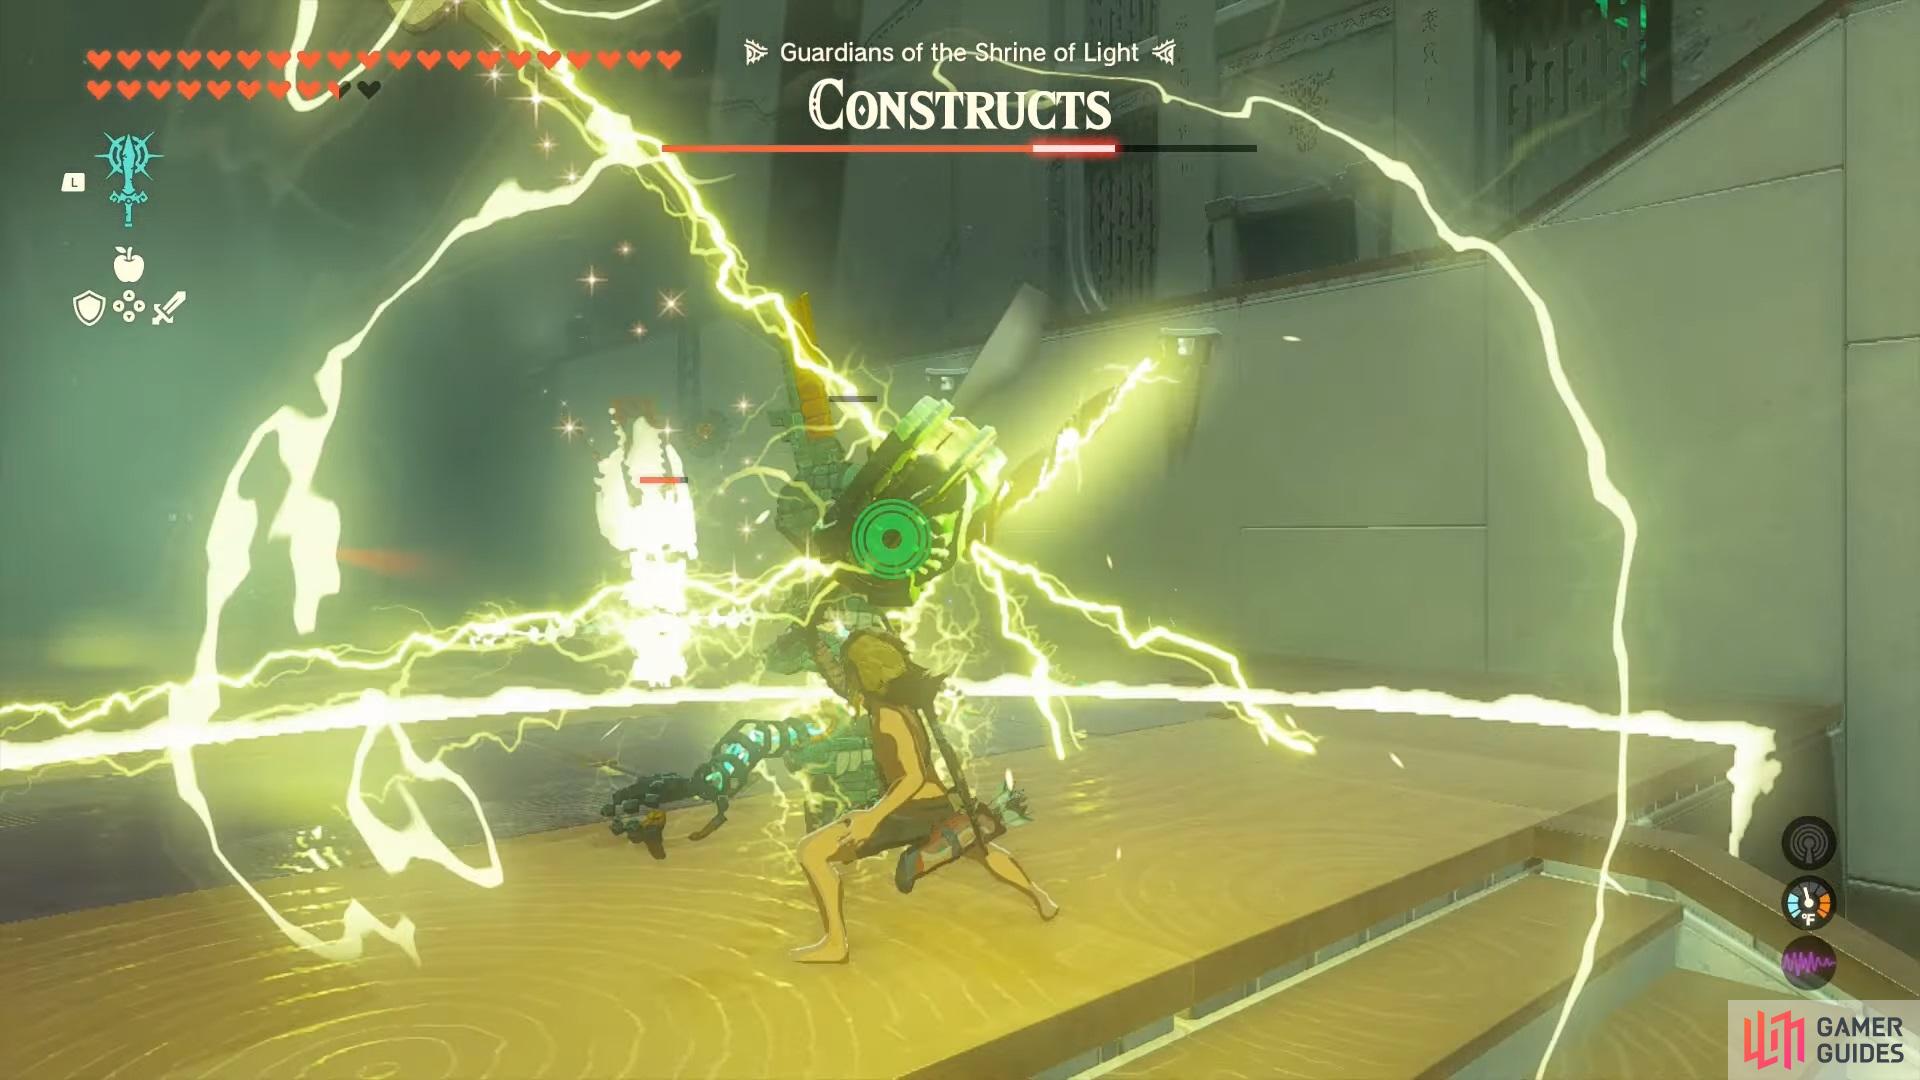 Using the fused !Shock Emitter weapon to electrocute the remaining enemies